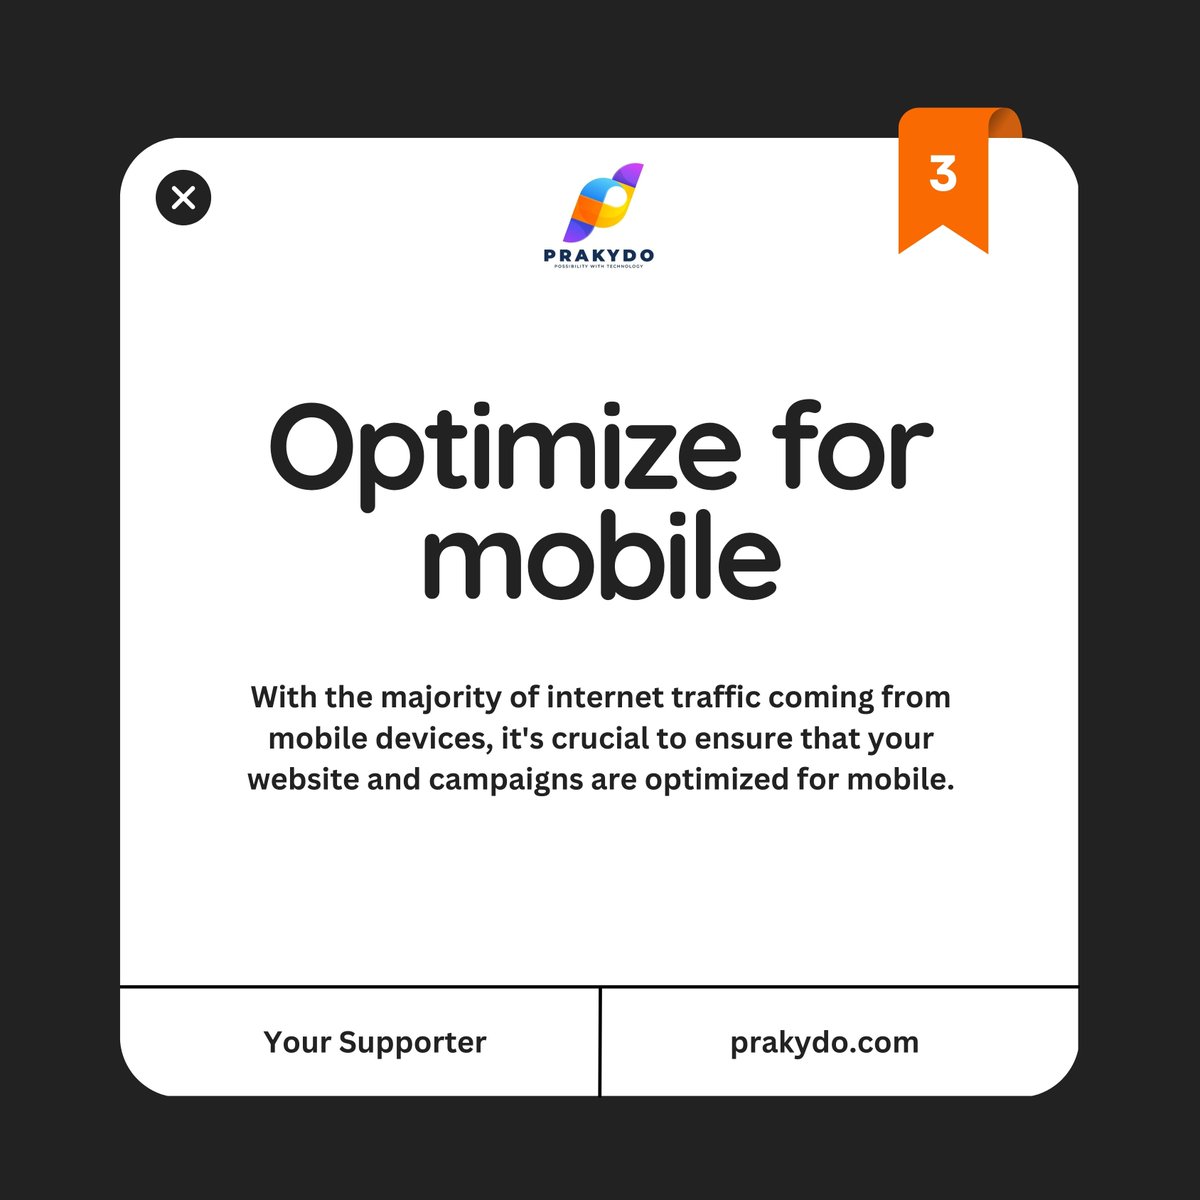 Mobile optimization is crucial to ensure our success. However, to attract a visitor make sure your website is friendly experience for better mobile optimization. #marketingcampaigns #mobileoptimization #optimizeformobile #digitalmarketing #searchengines #marketingdiging